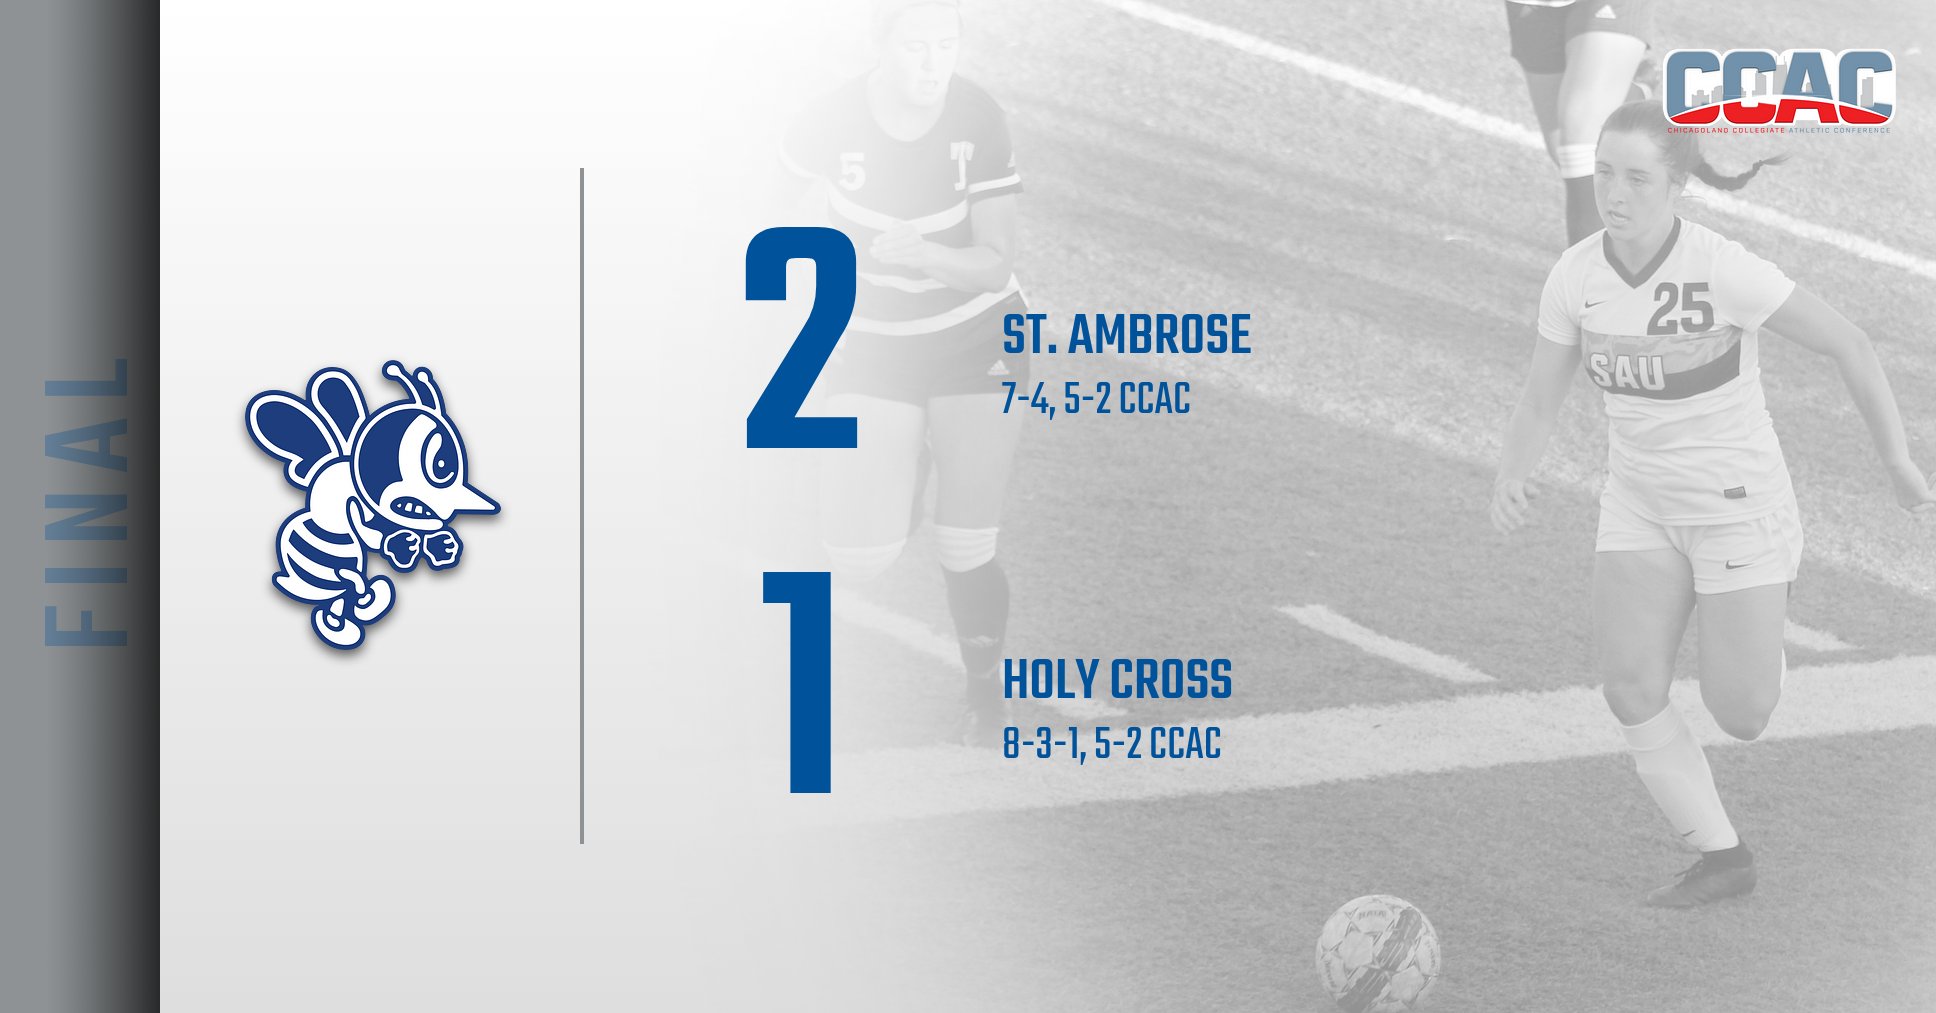 St. Ambrose wins conference road test